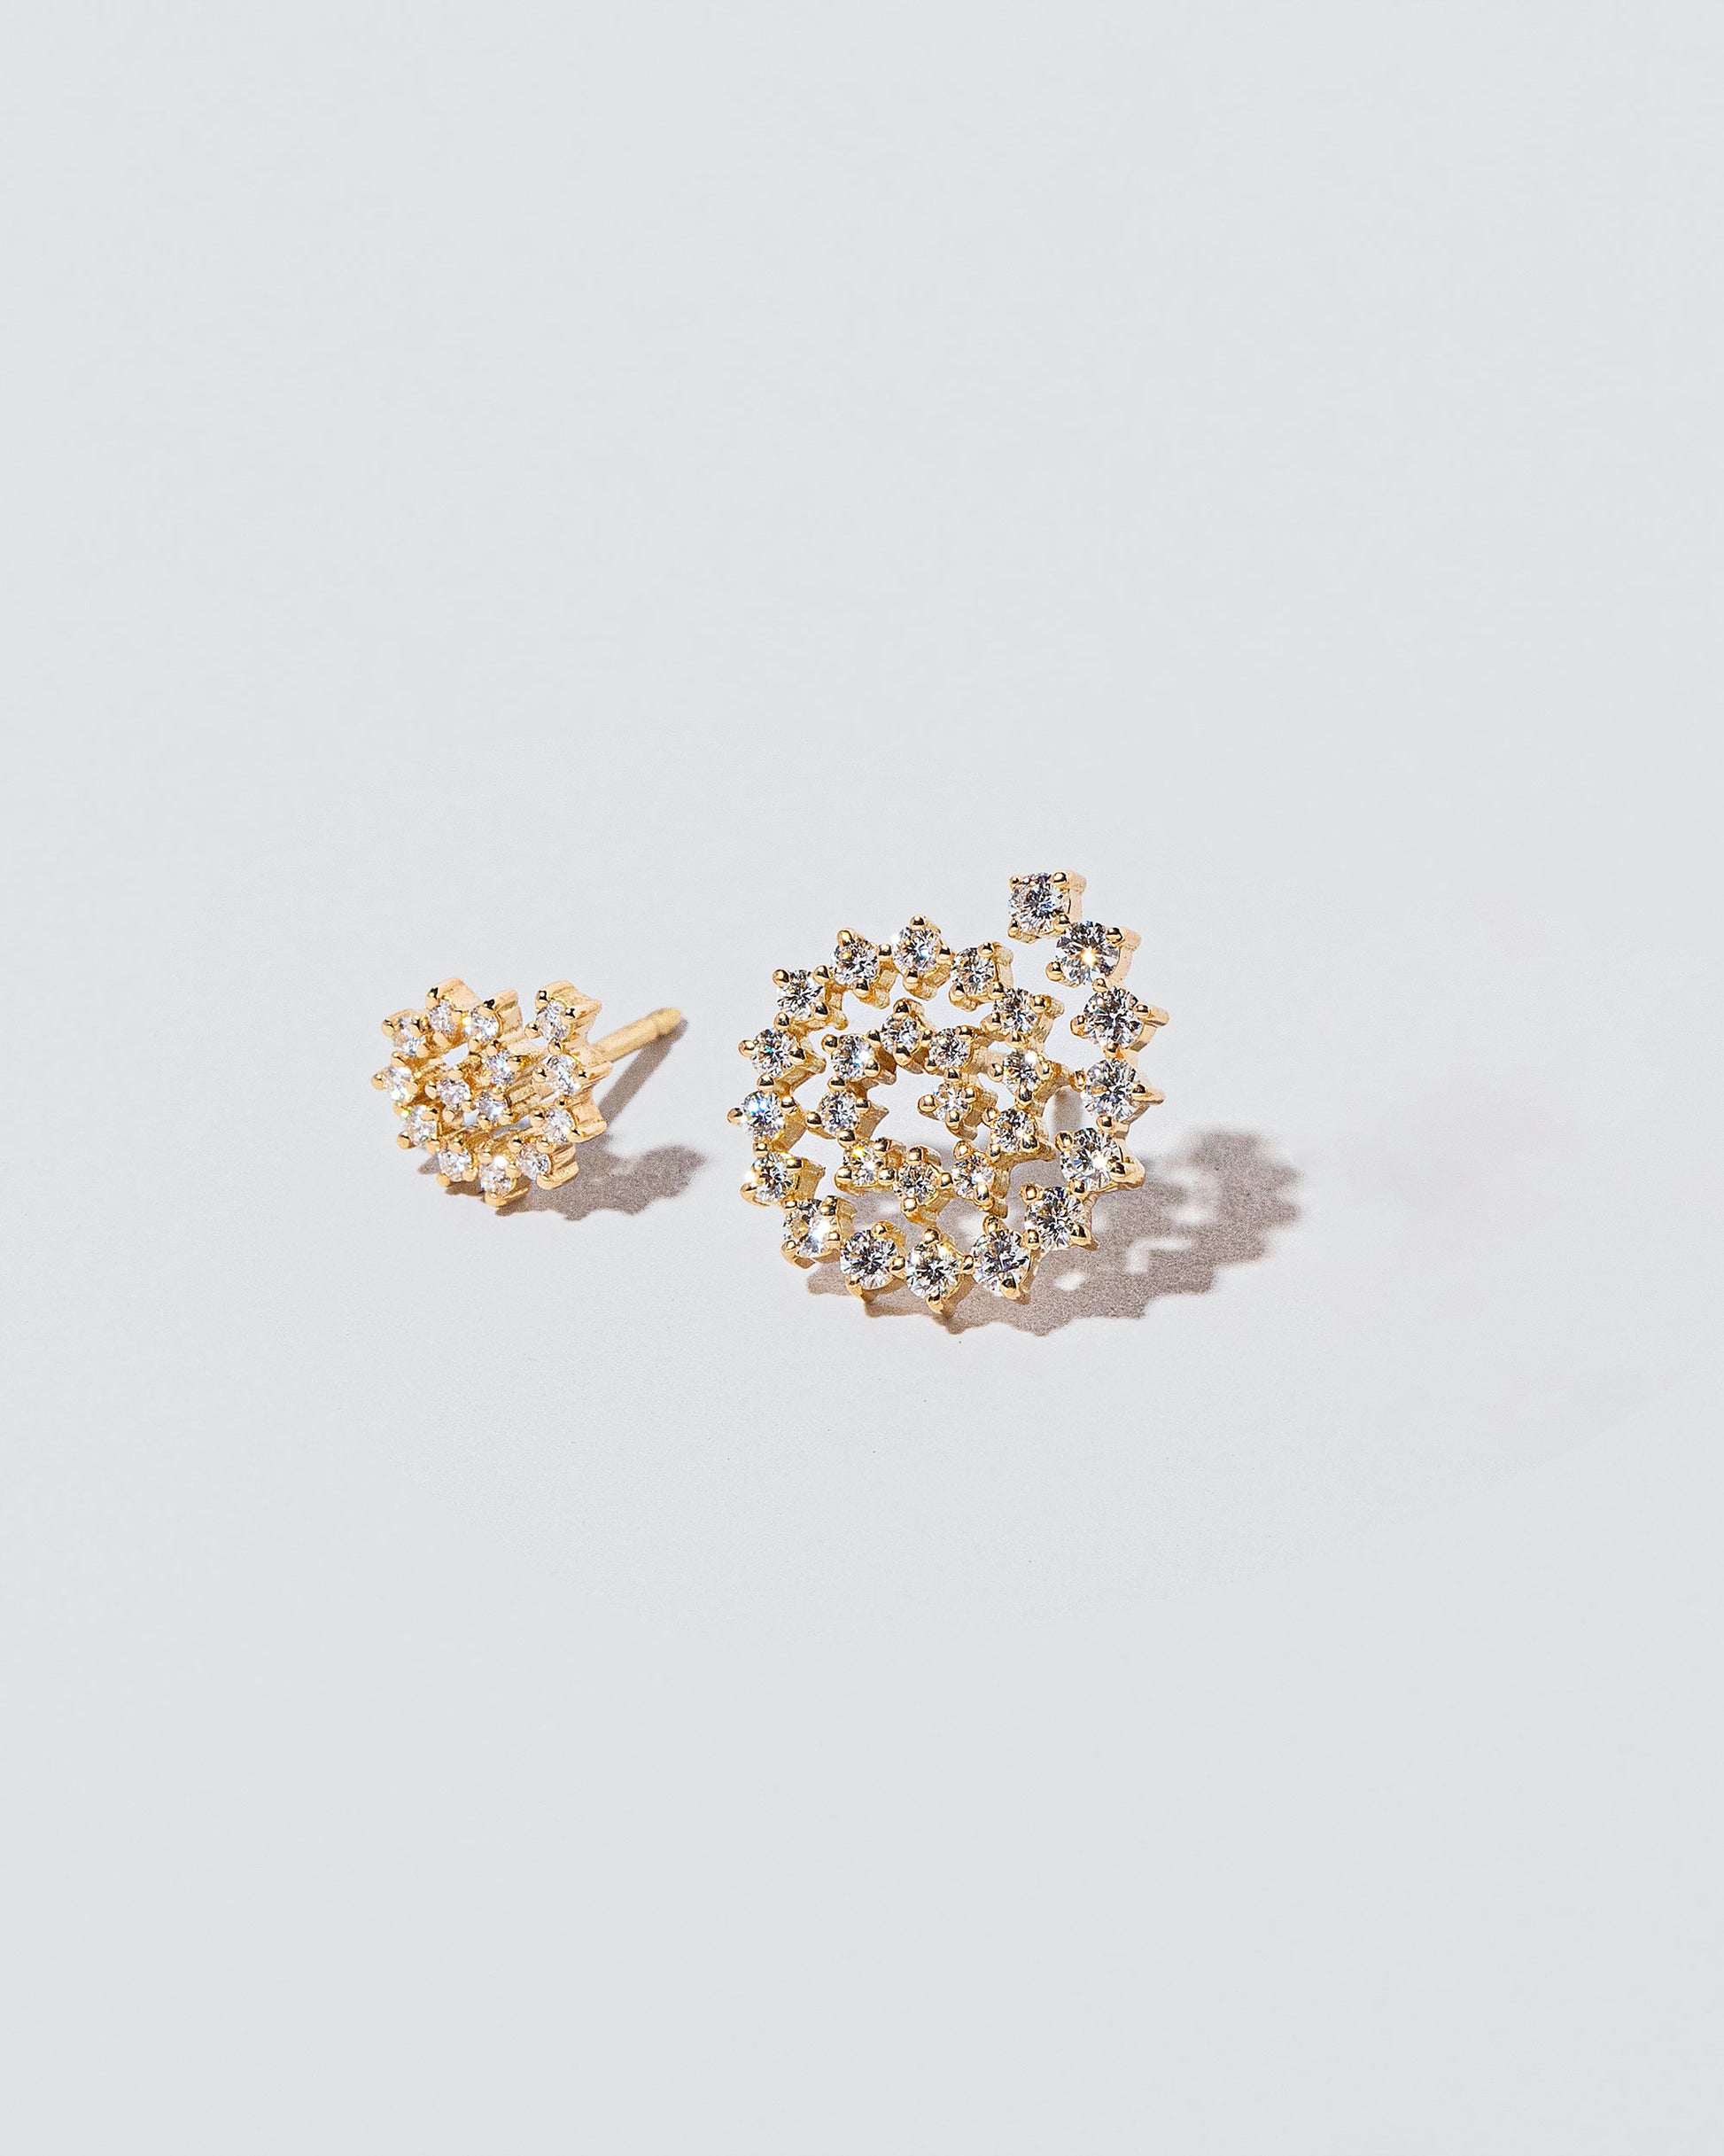 Mini and Full Spiral Earring Single Studs on light colored background.